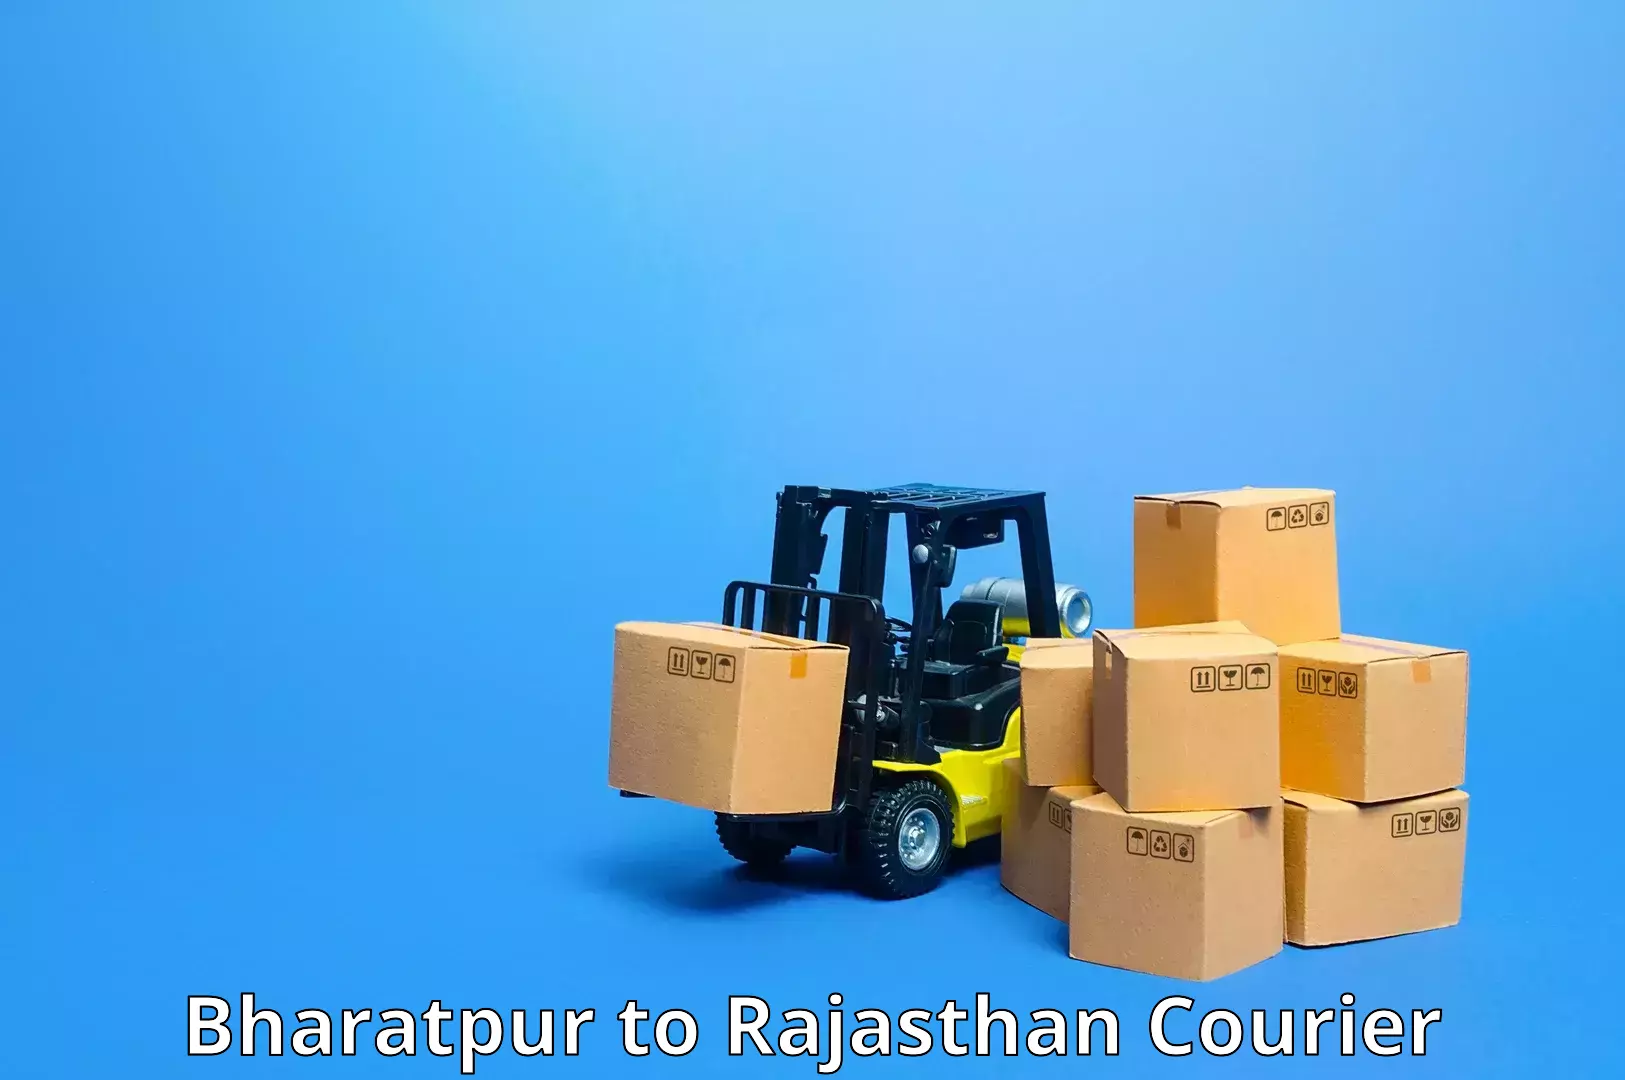 Parcel service for businesses Bharatpur to Jaipur